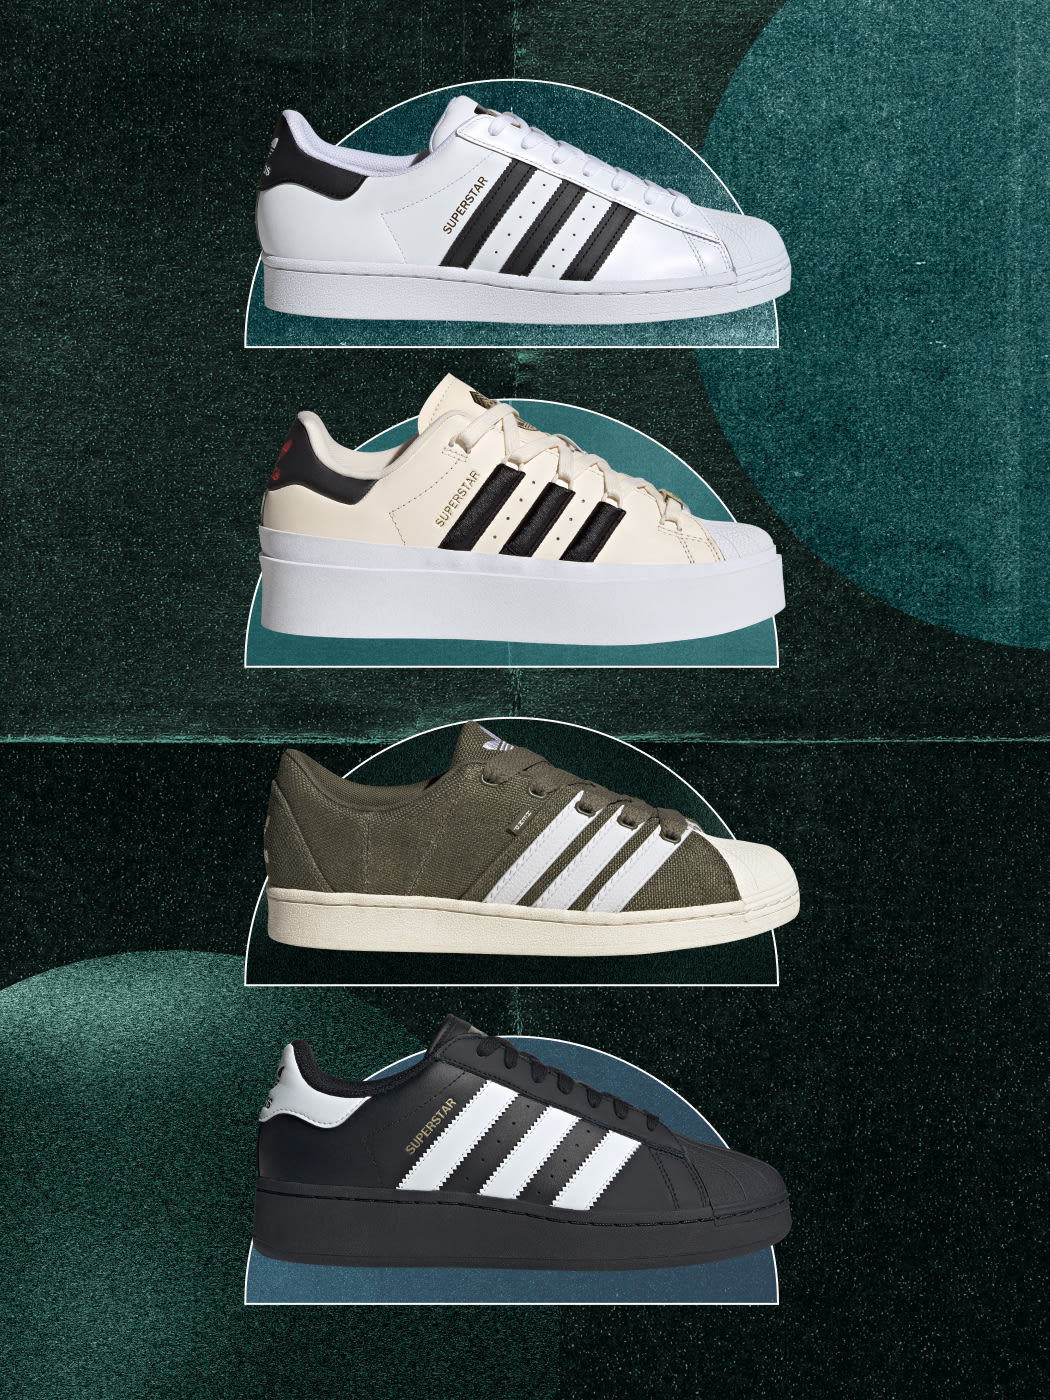 How Do adidas Superstar Shoes Fit? The Guide for All